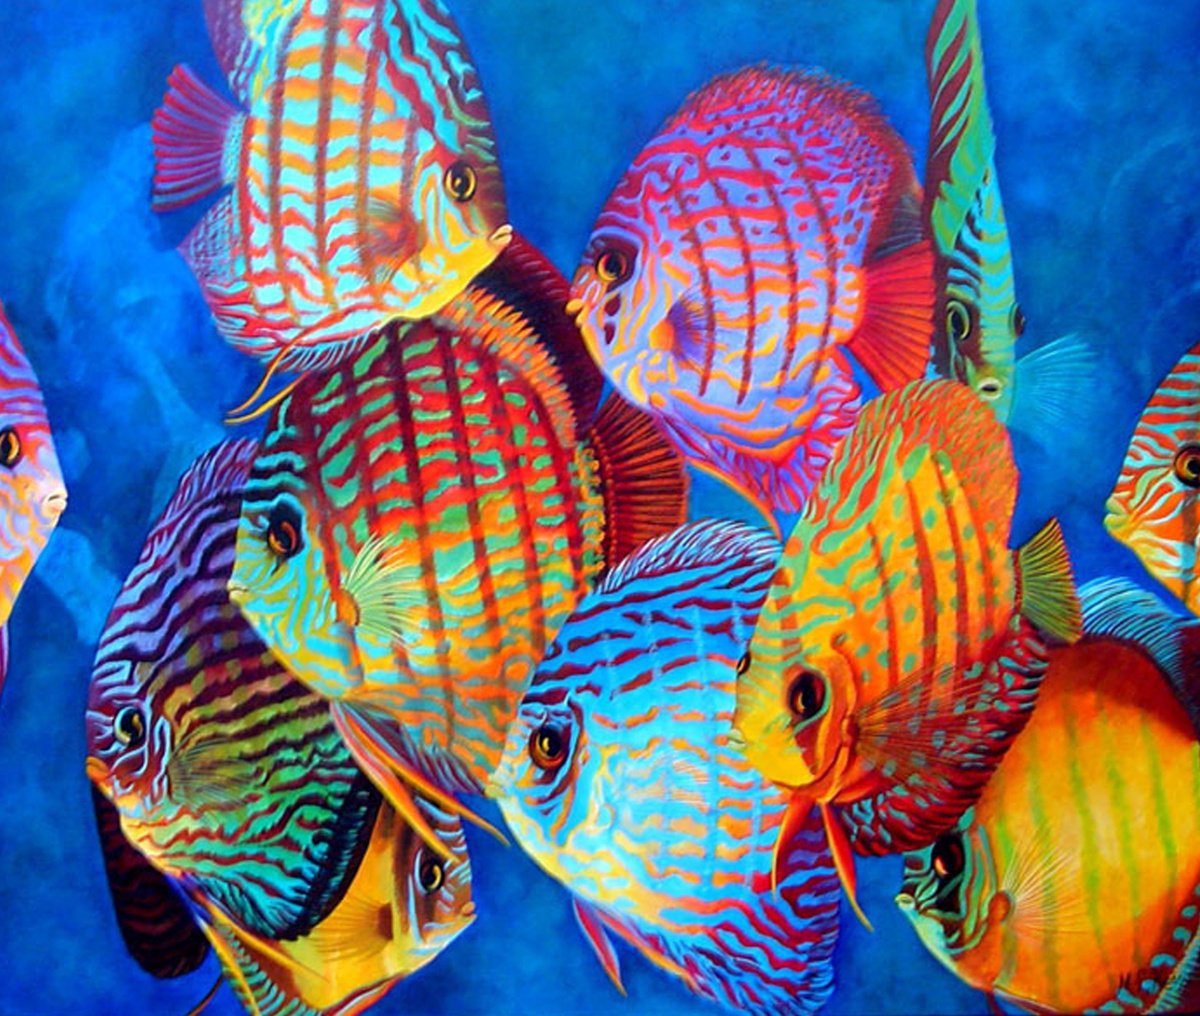 Curious Discus by Micheline Lamarre Hadjis